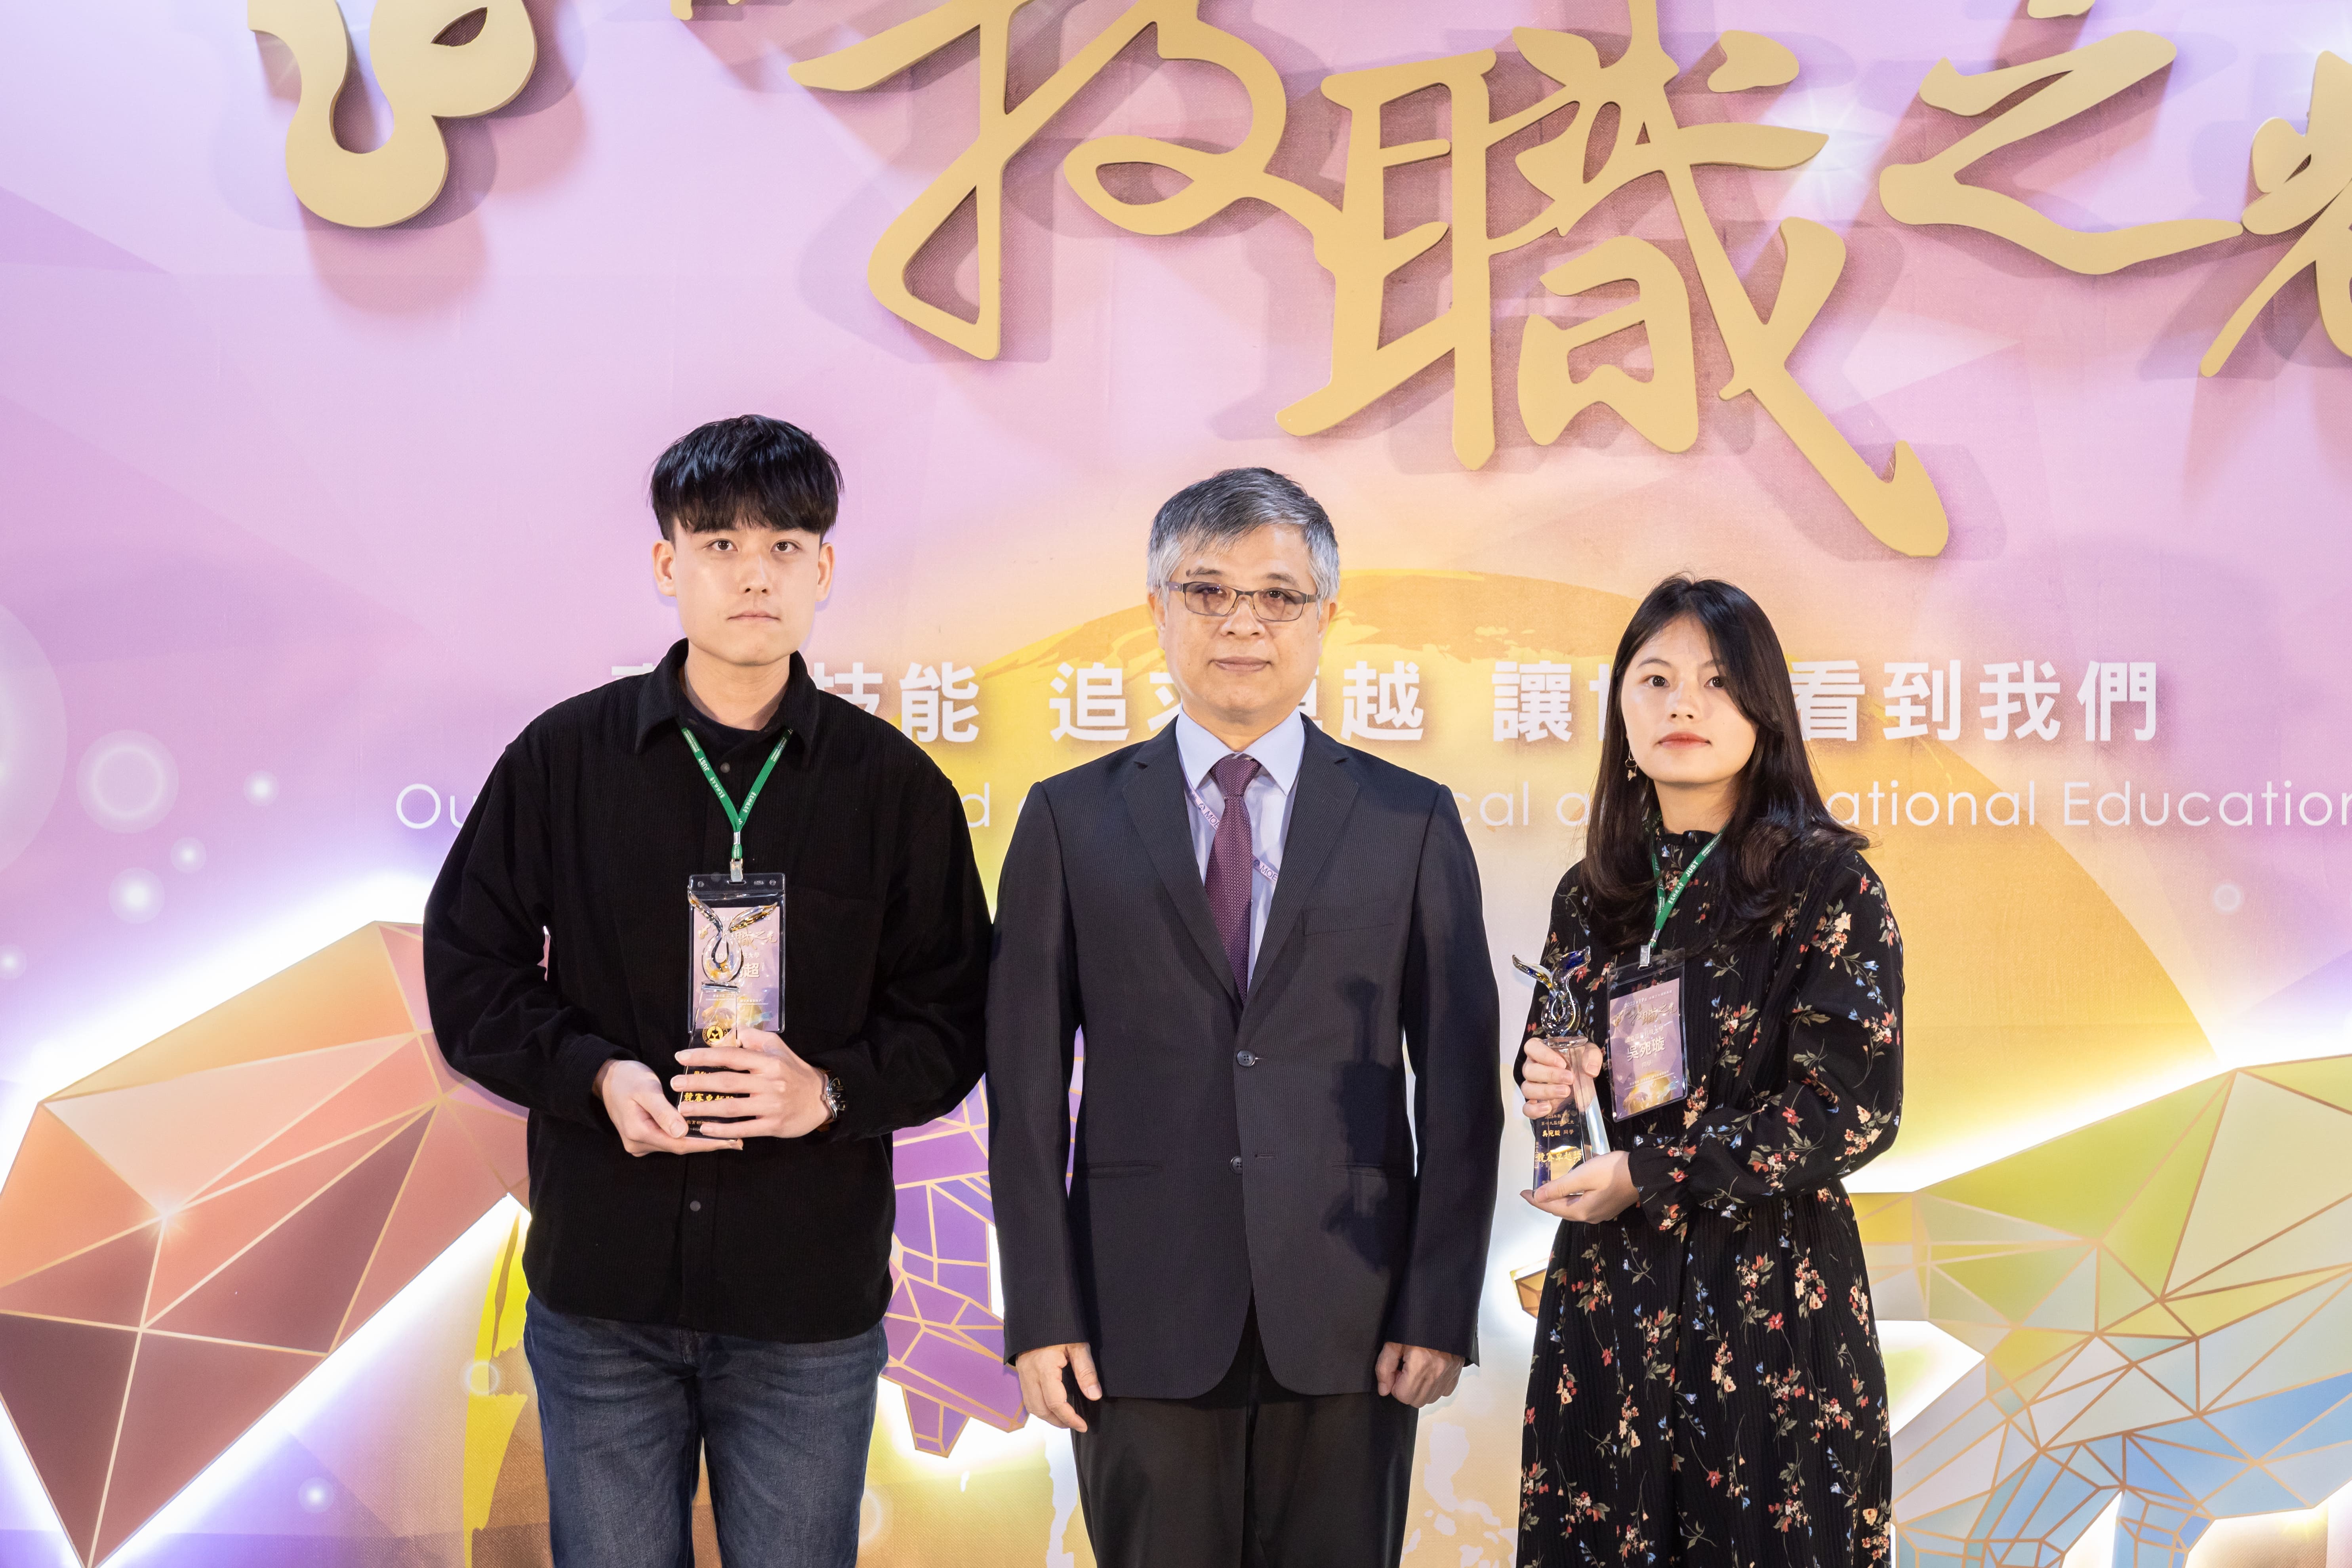 The master's students from the Department of Architecture, Qin-Chao Zhou (left) and Wan-Xuan Wu (right) were honored with the Ministry of Education's Outstanding Competition Award in technical and vocational education.